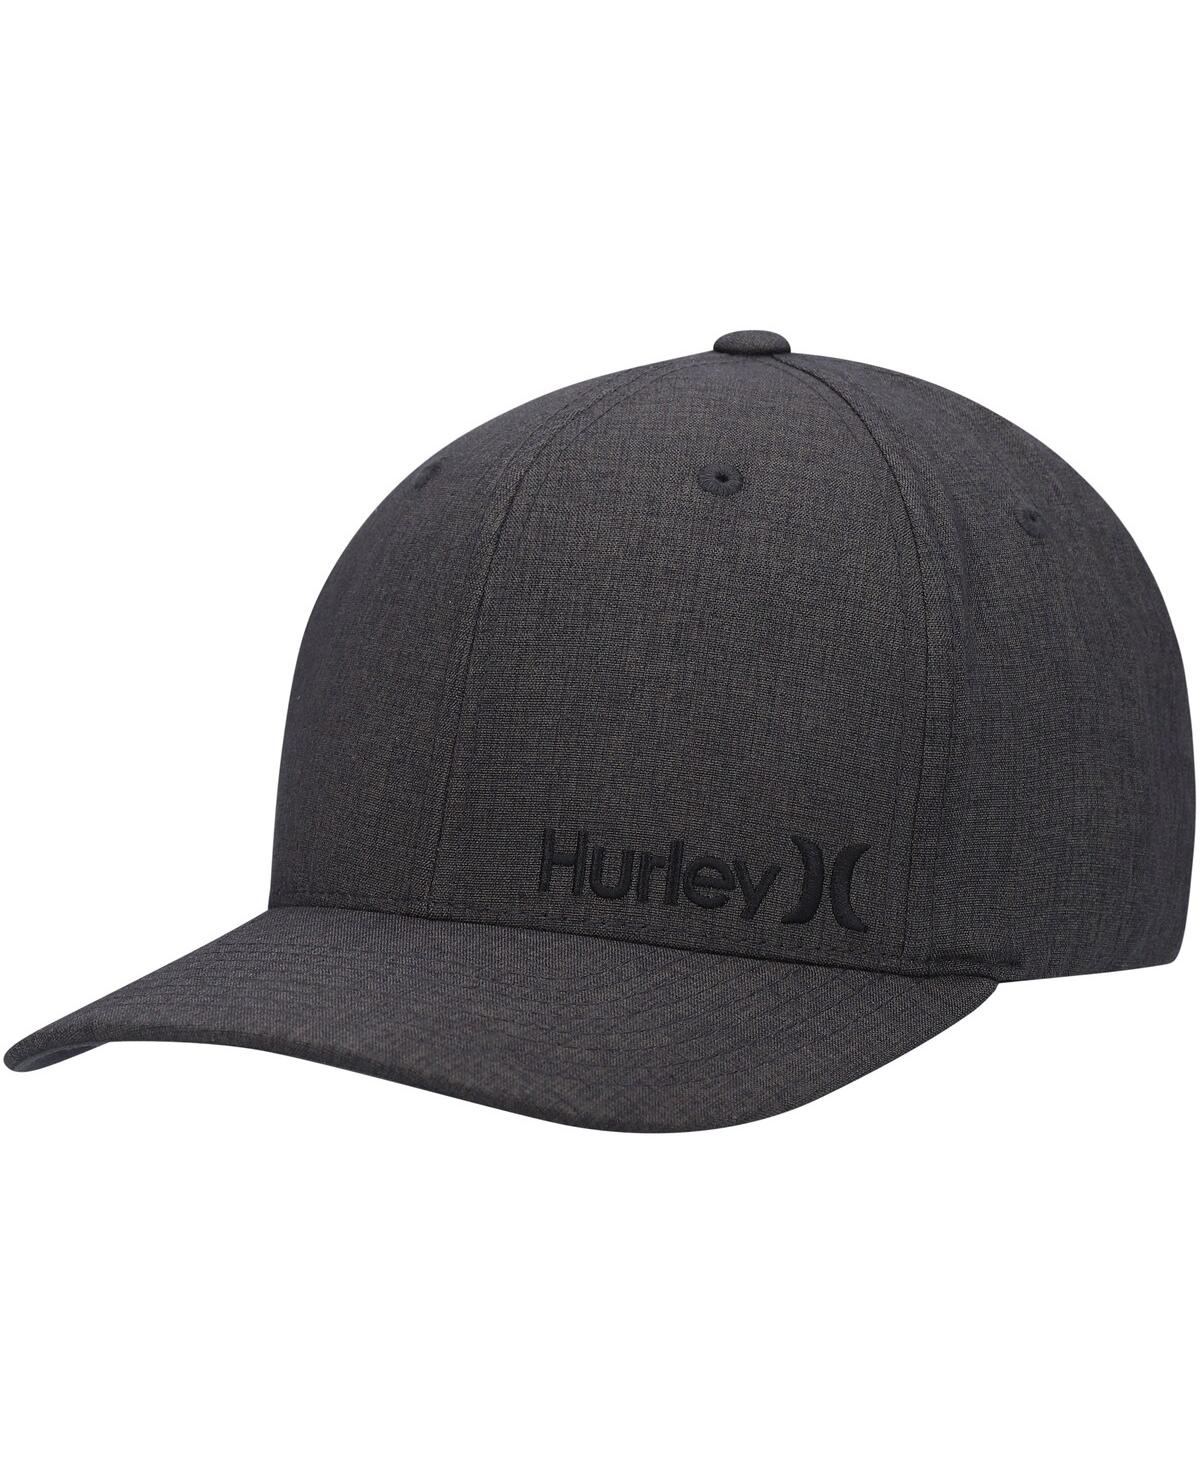 Hurley Men's  Heathered Charcoal Corp Textured Tri-blend Flex Fit Hat